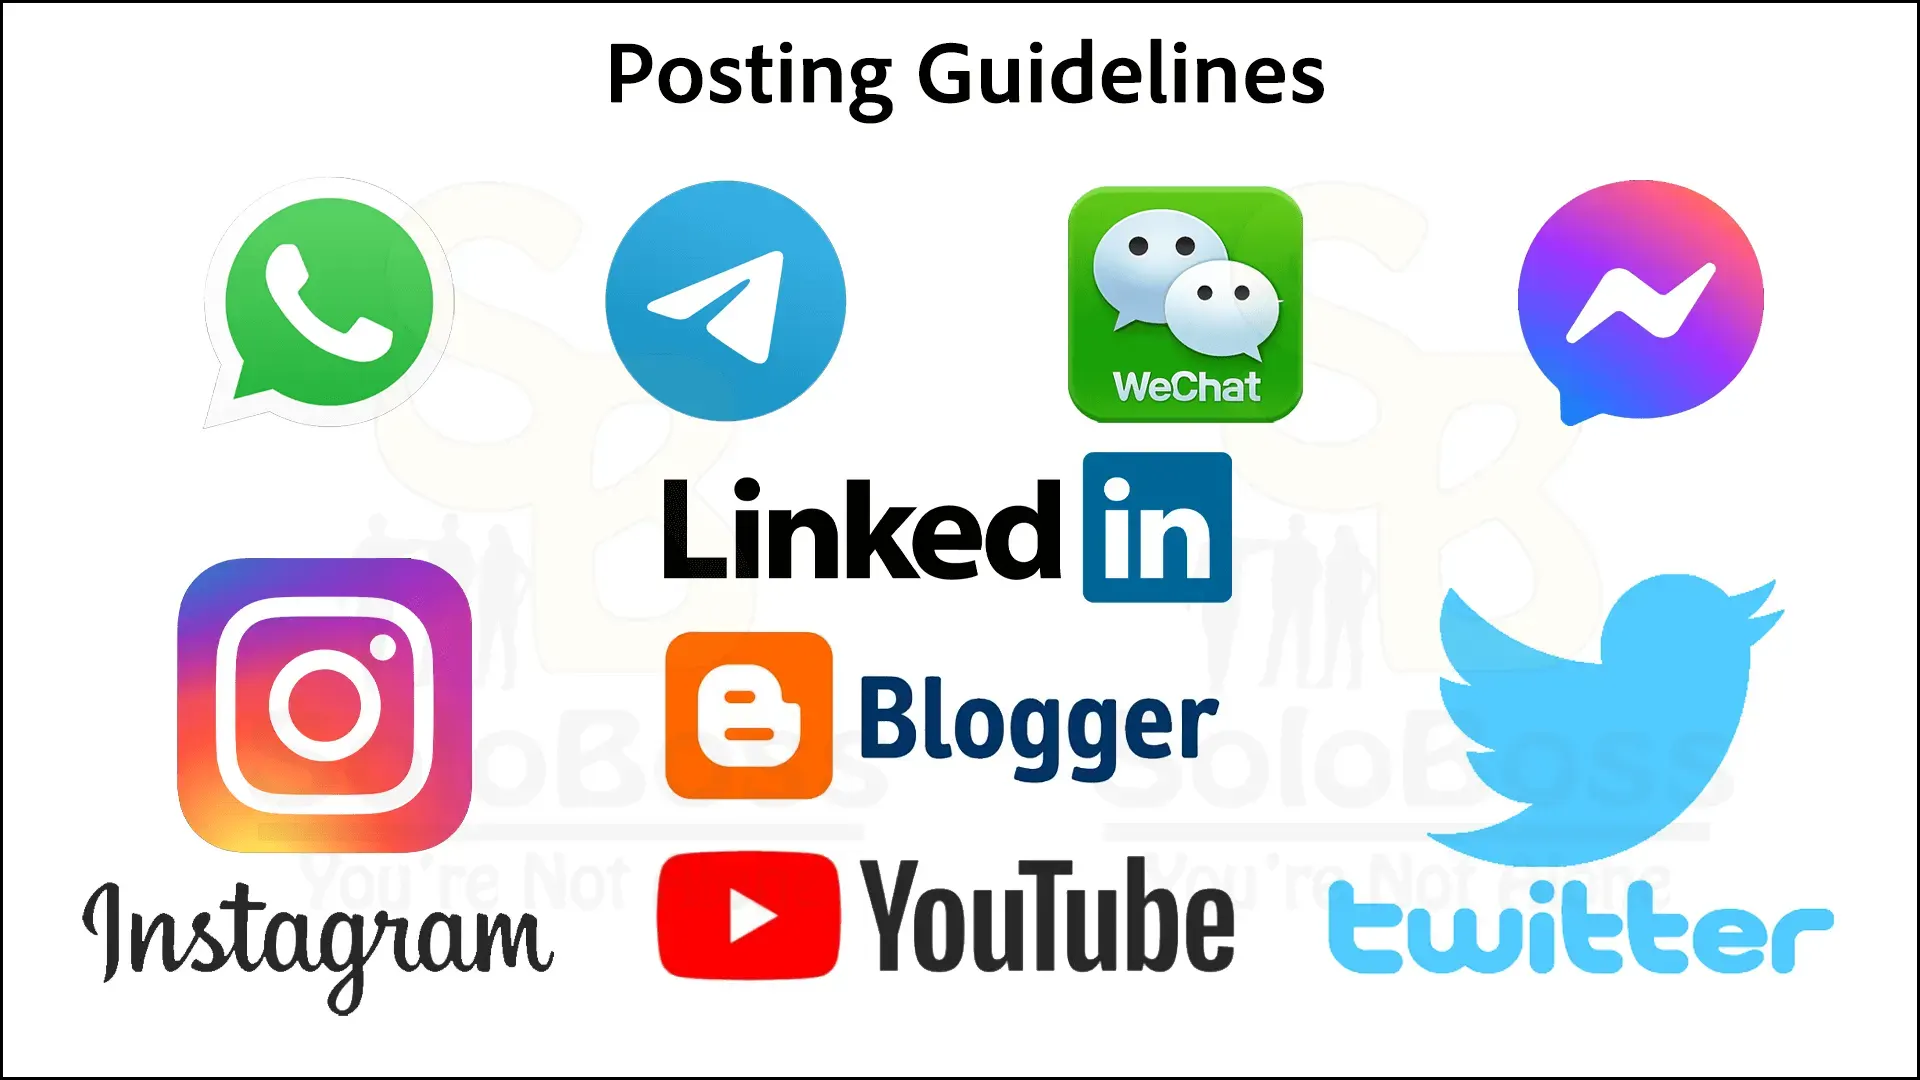 Displays various social media icons, including YouTube, Twitter, Blogger, LinkedIn, Instagram and more, to which a video production can be posted.